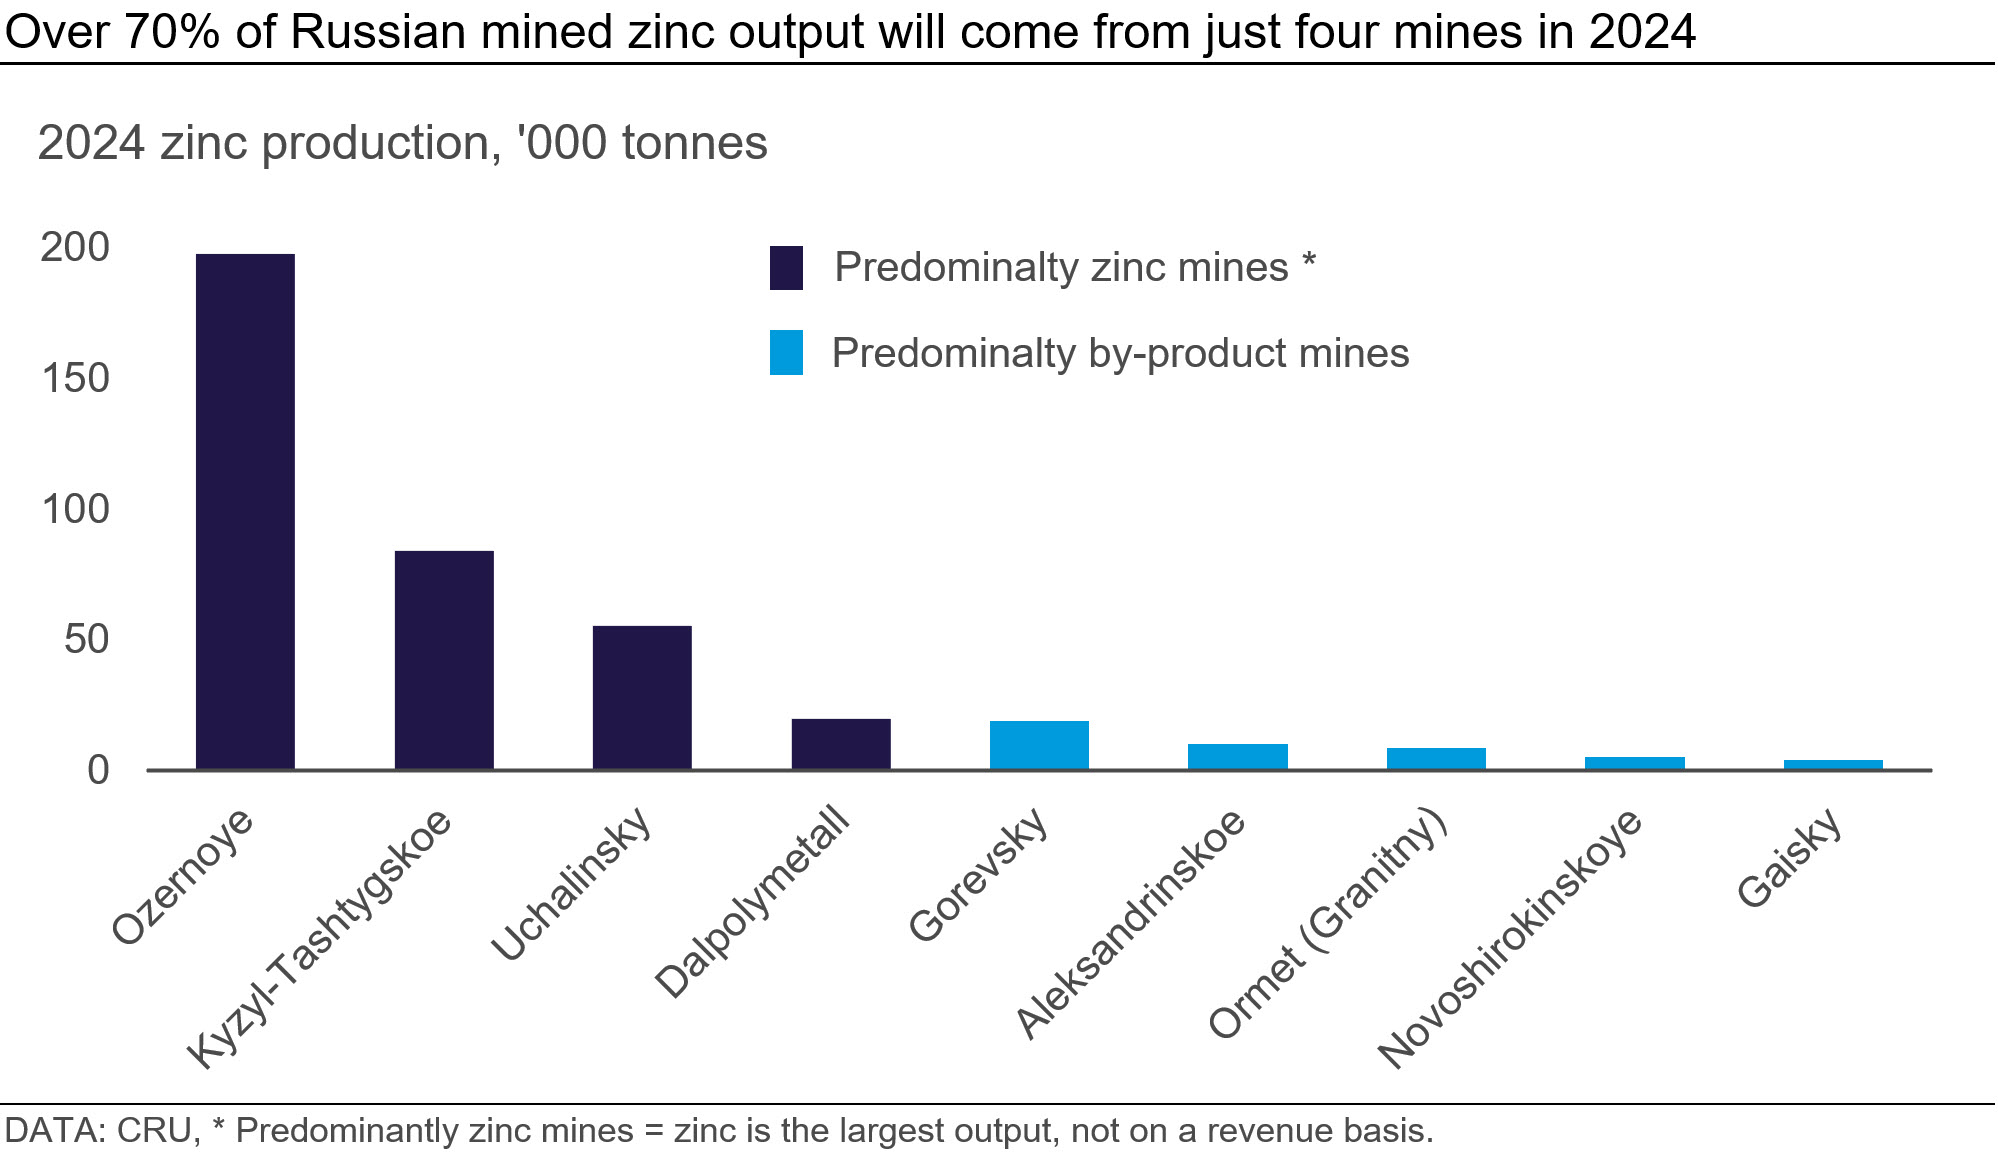 Graph showing that over 70% of Russian mined zinc output will come from just four mines in 2024